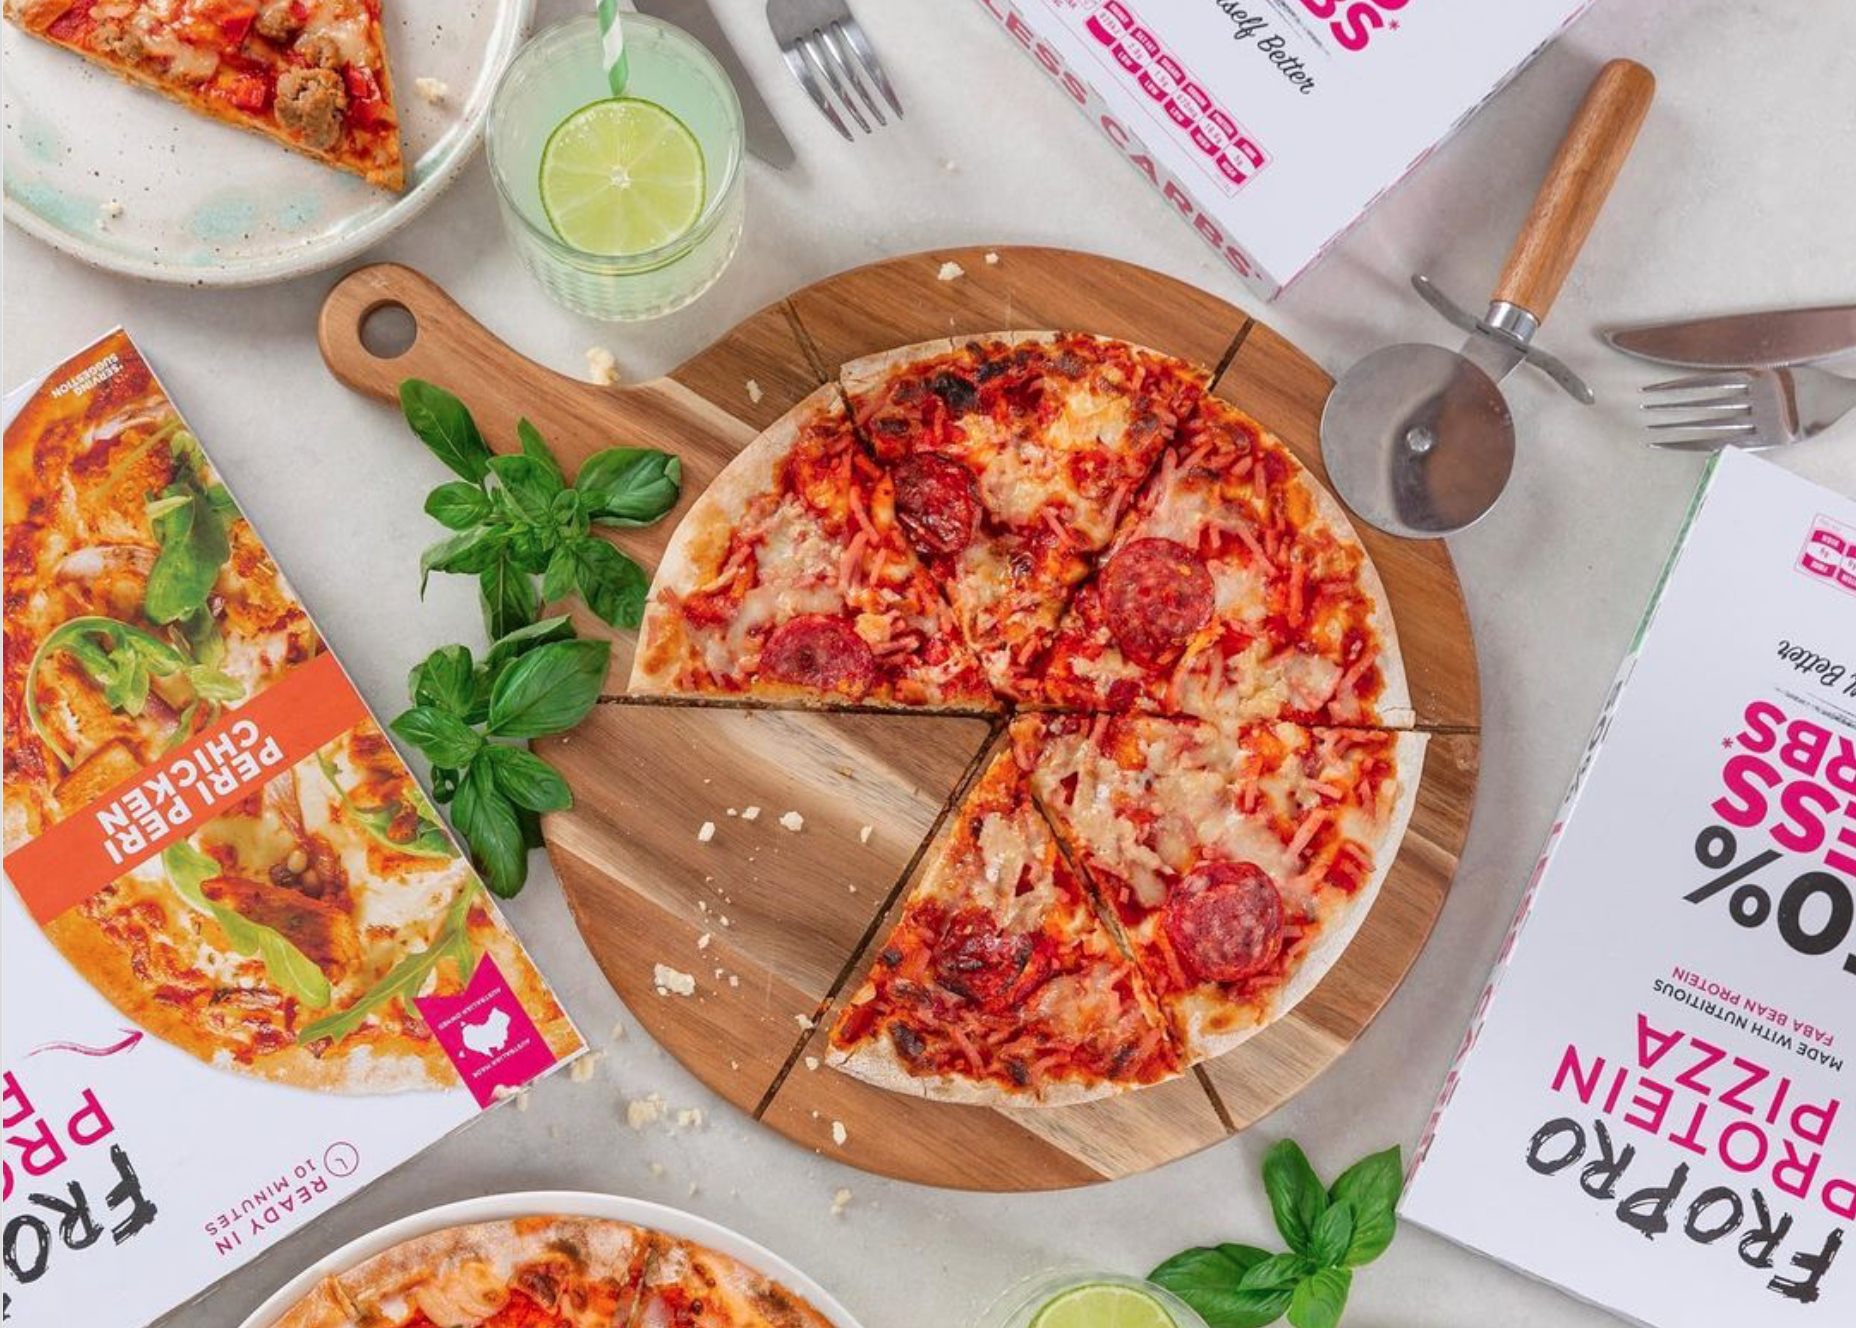 FroPro is baking history with their all new Protein Pizza